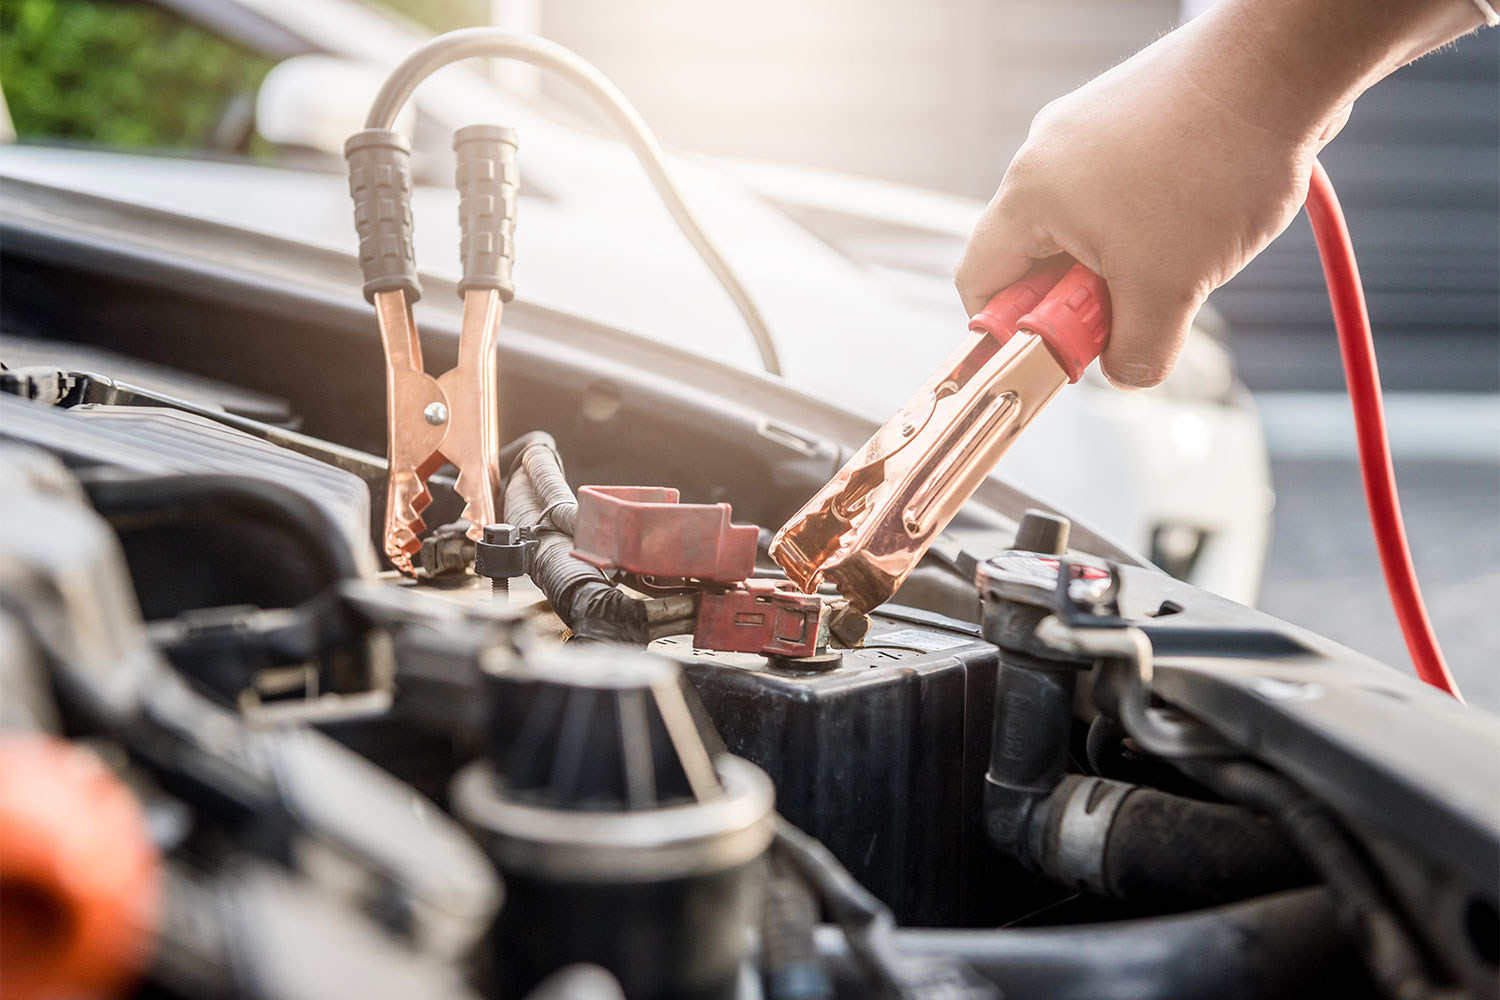 How to Jump Start a Car Using Jump Leads